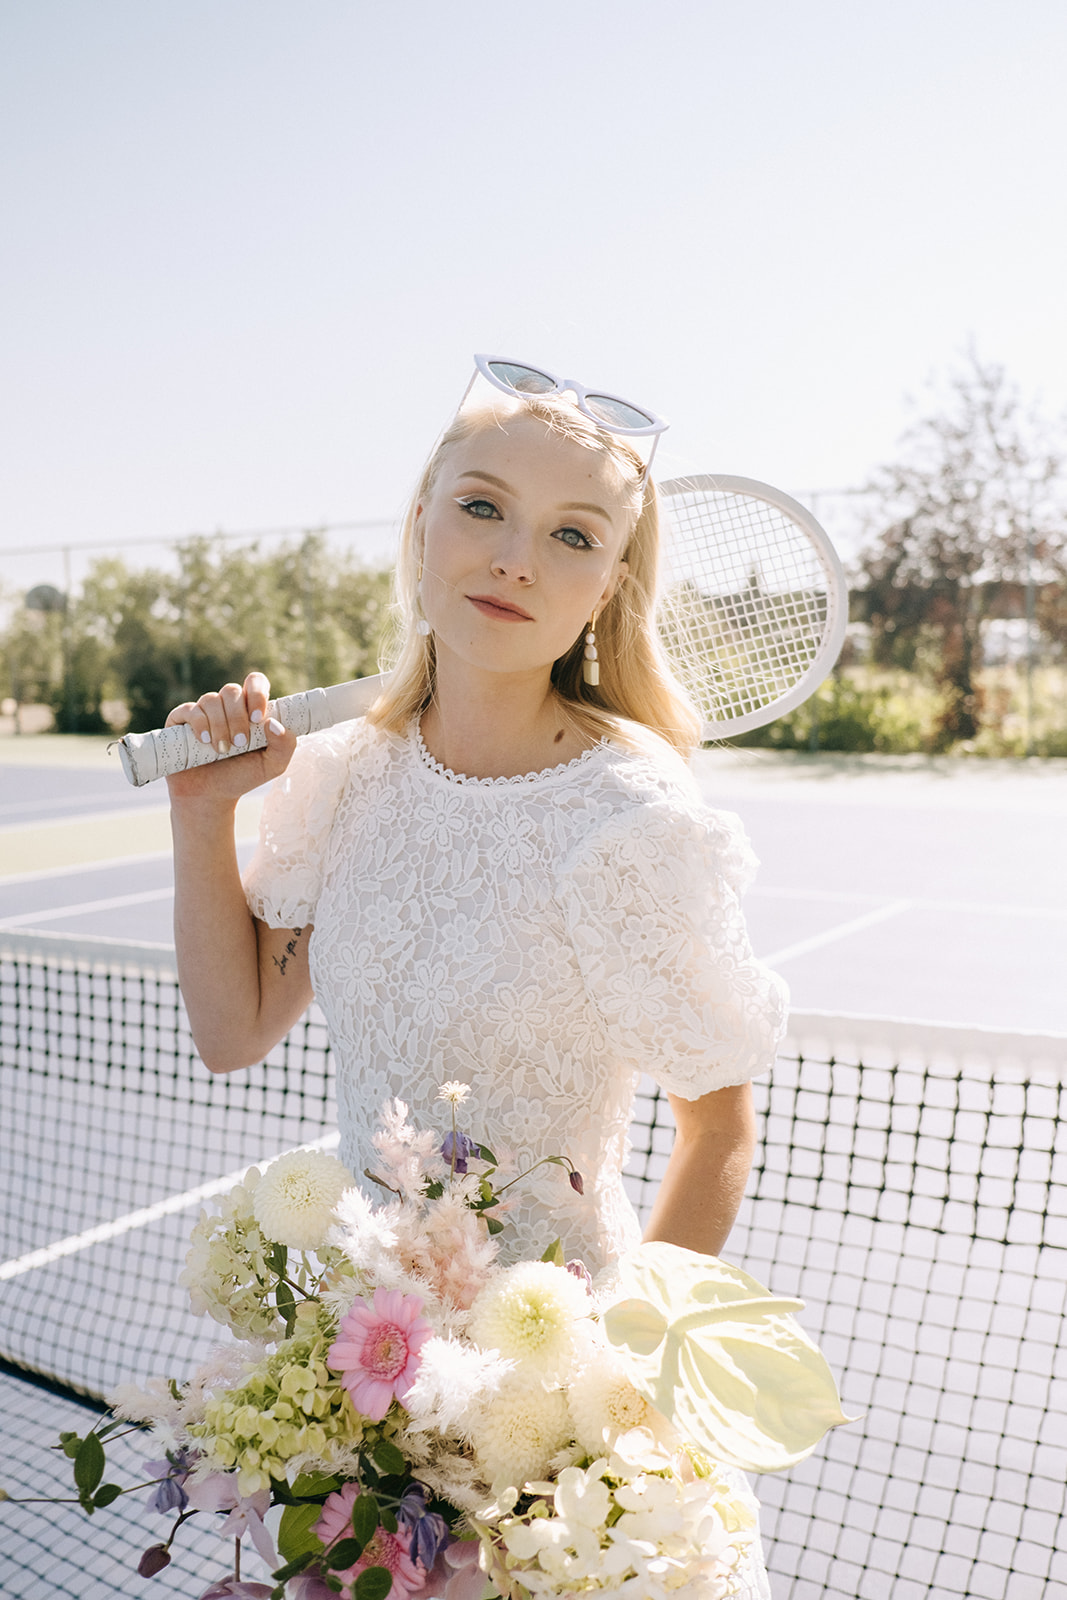 Tennis themed wedding ideas for a sporty bridal inspiration, sporty bridal make-up with white eyeliner by Madi Leigh Artistry, unique bridal portrait on a tennis court with bride holding a racquet 